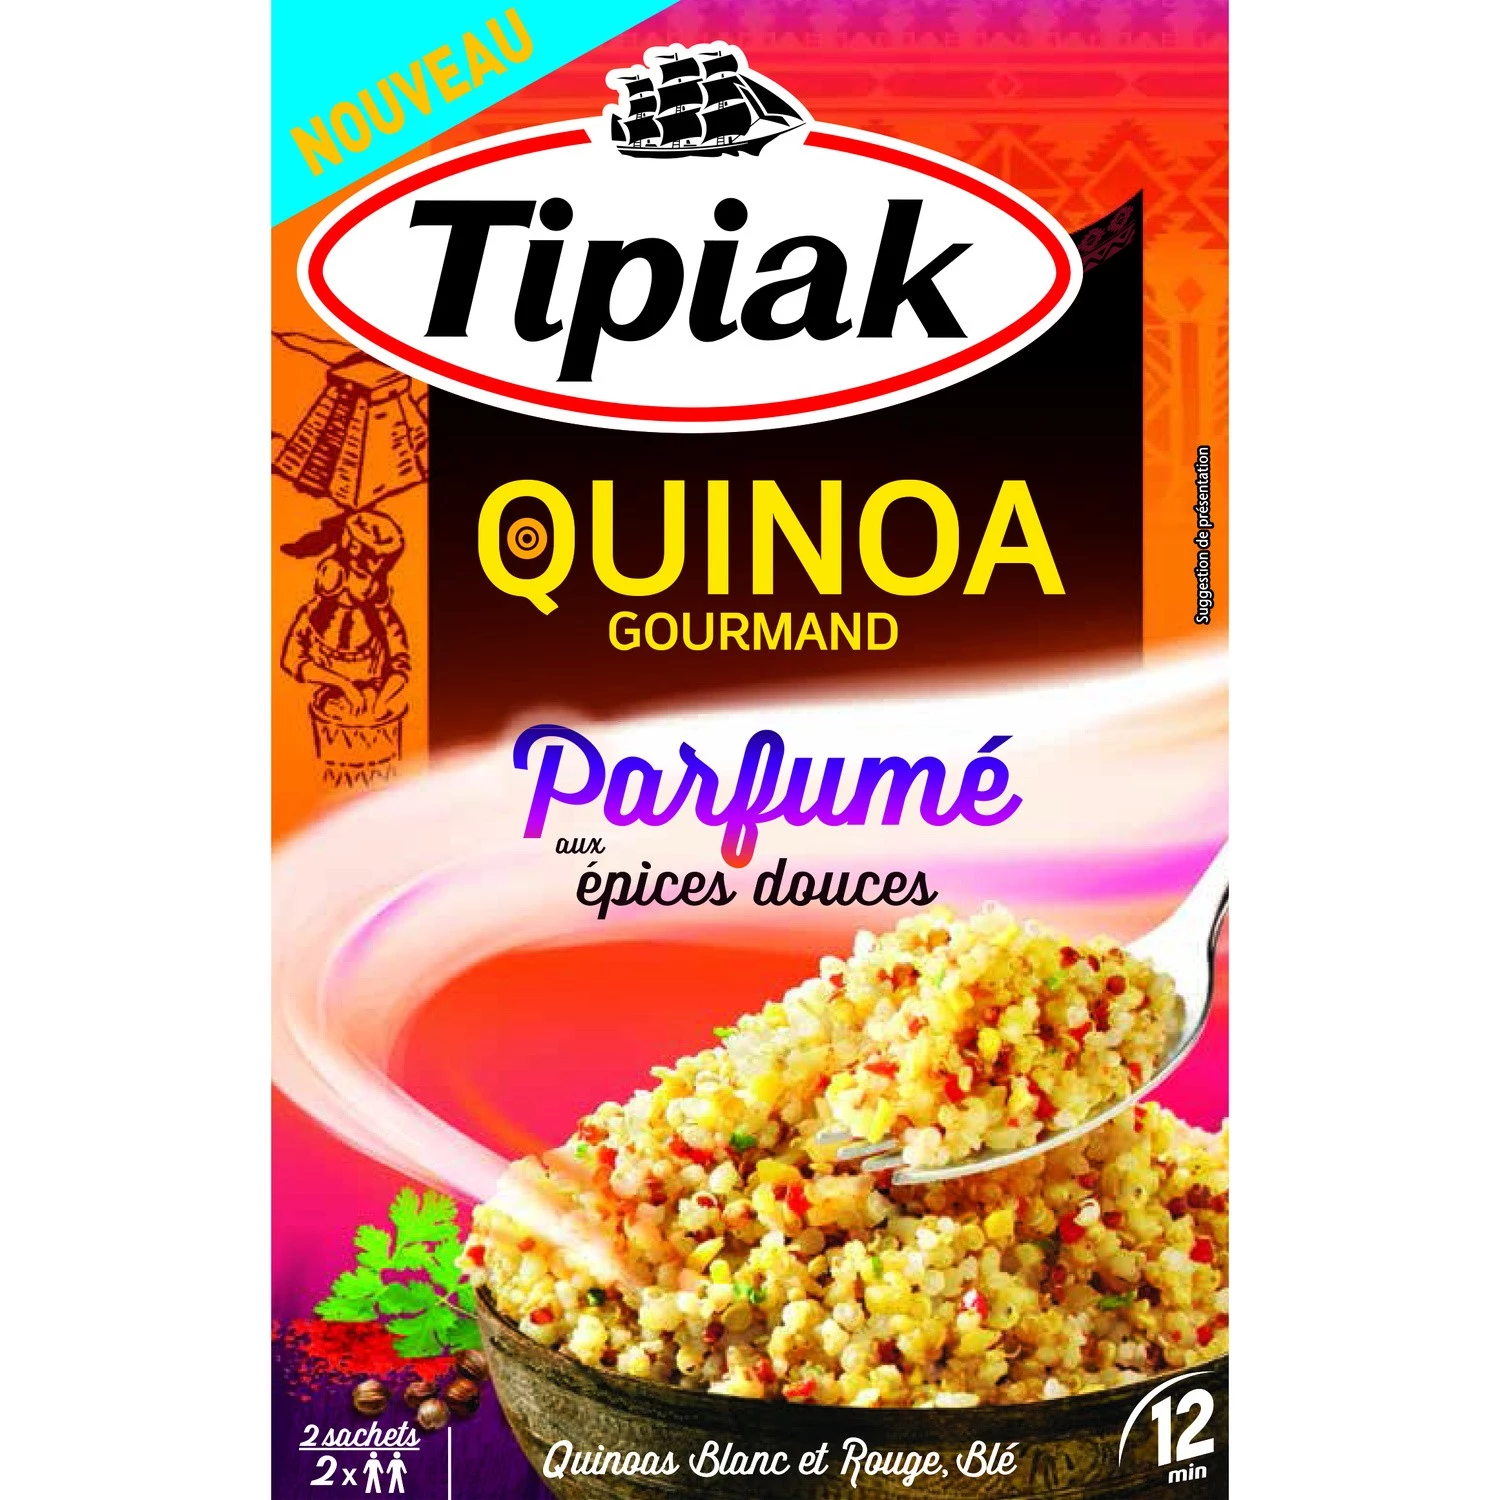 Flavored Gourmet Quinoa with Sweet Spices, 2x120g - TIPIAK